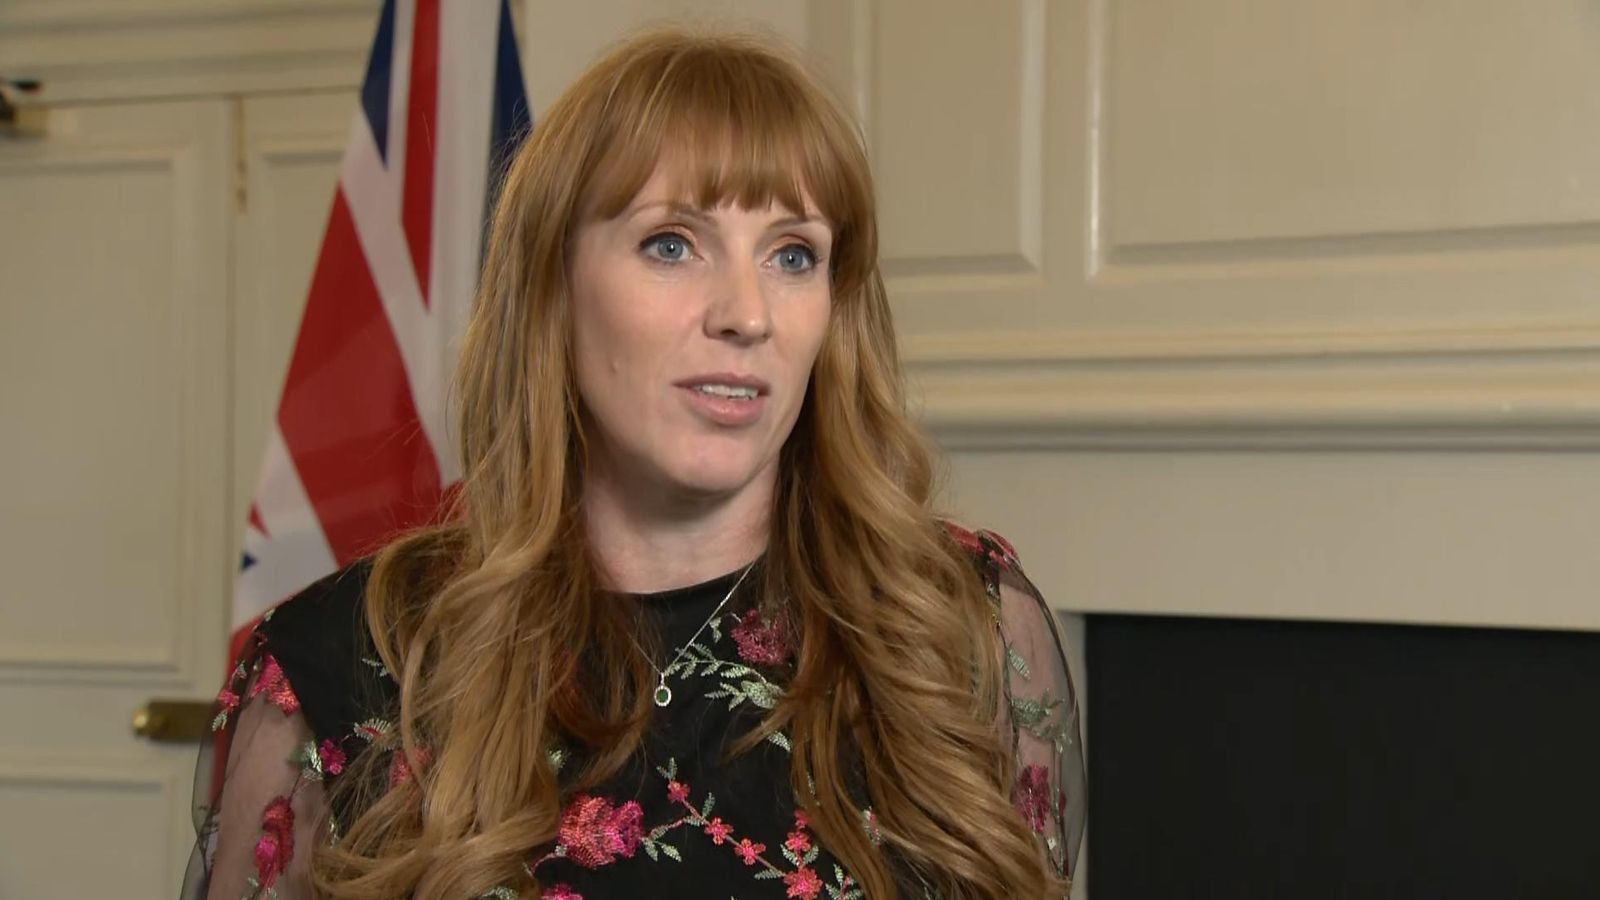 Man charged with sending offensive messages to Labour deputy leader Angela Rayner